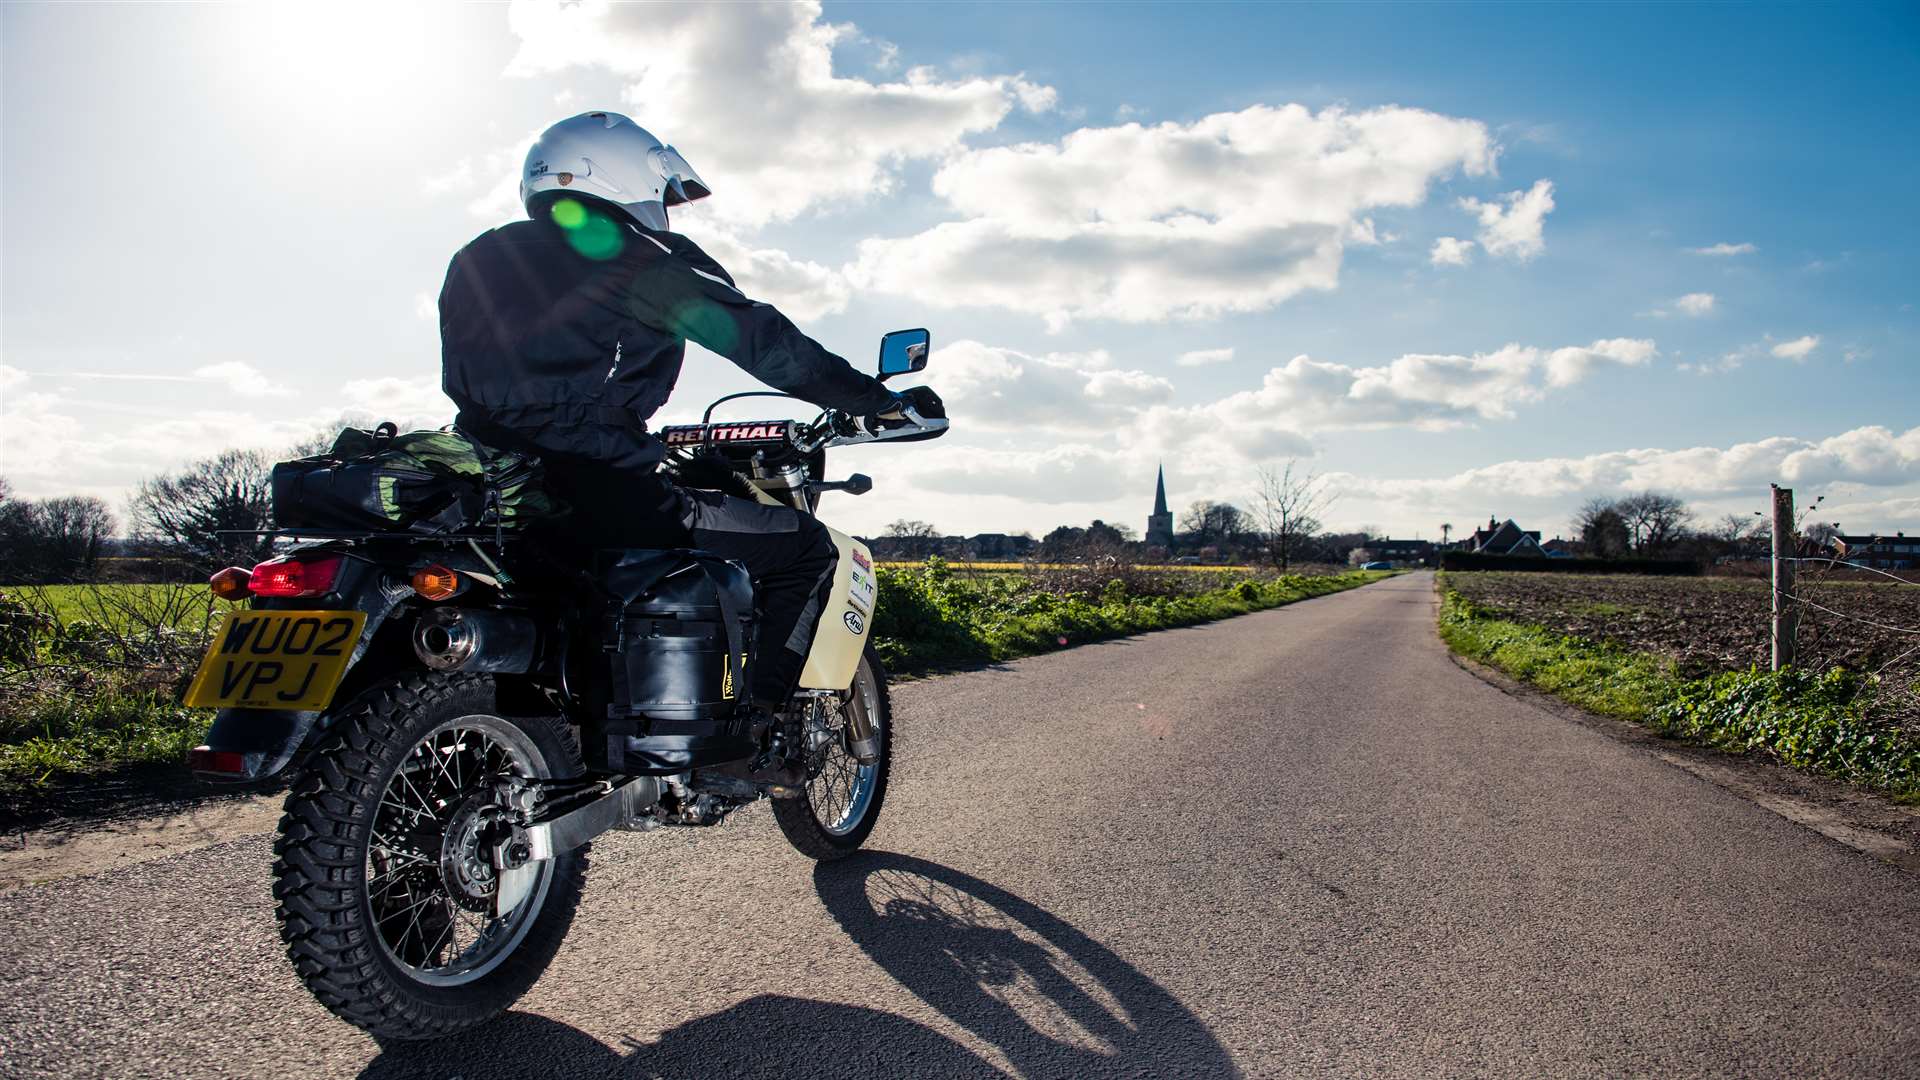 His trip will see him ride more than 25,000 miles across four continents. Picture: Andy Heathcote